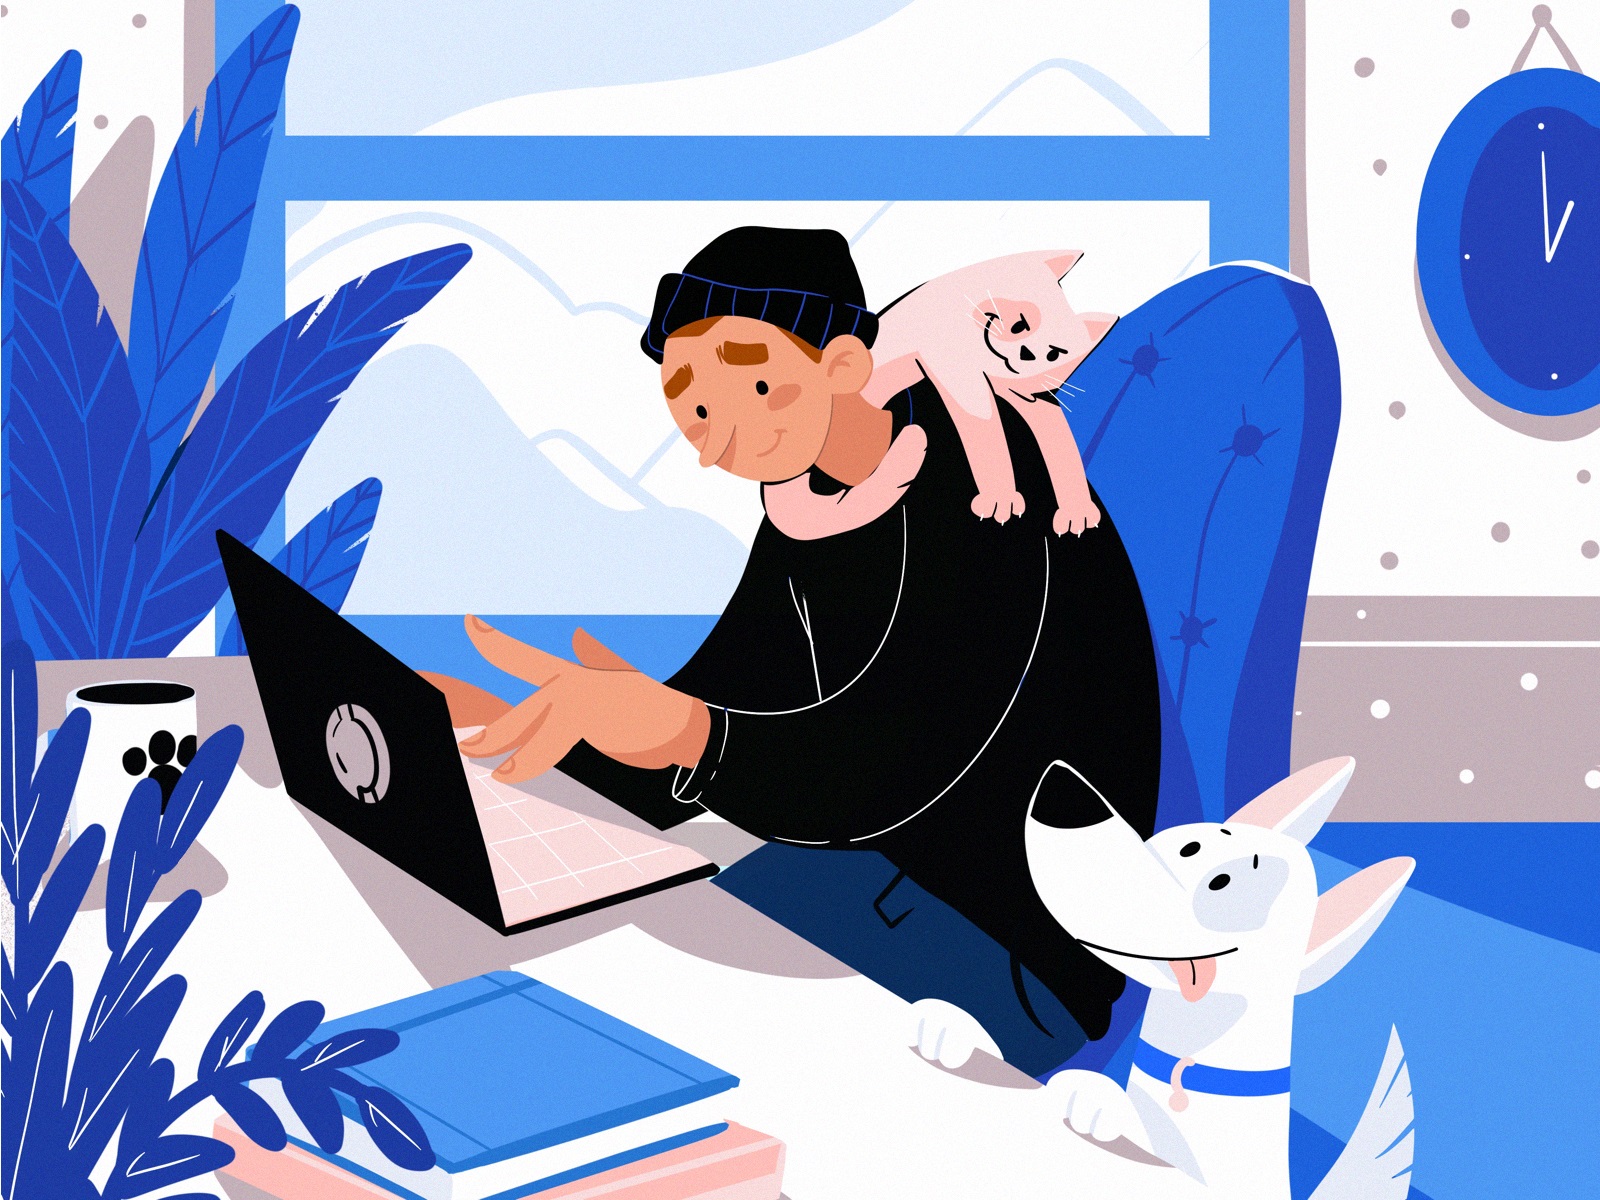 Stay Safe, Stay Home: Digital Illustrations About Life and Work in Isolation